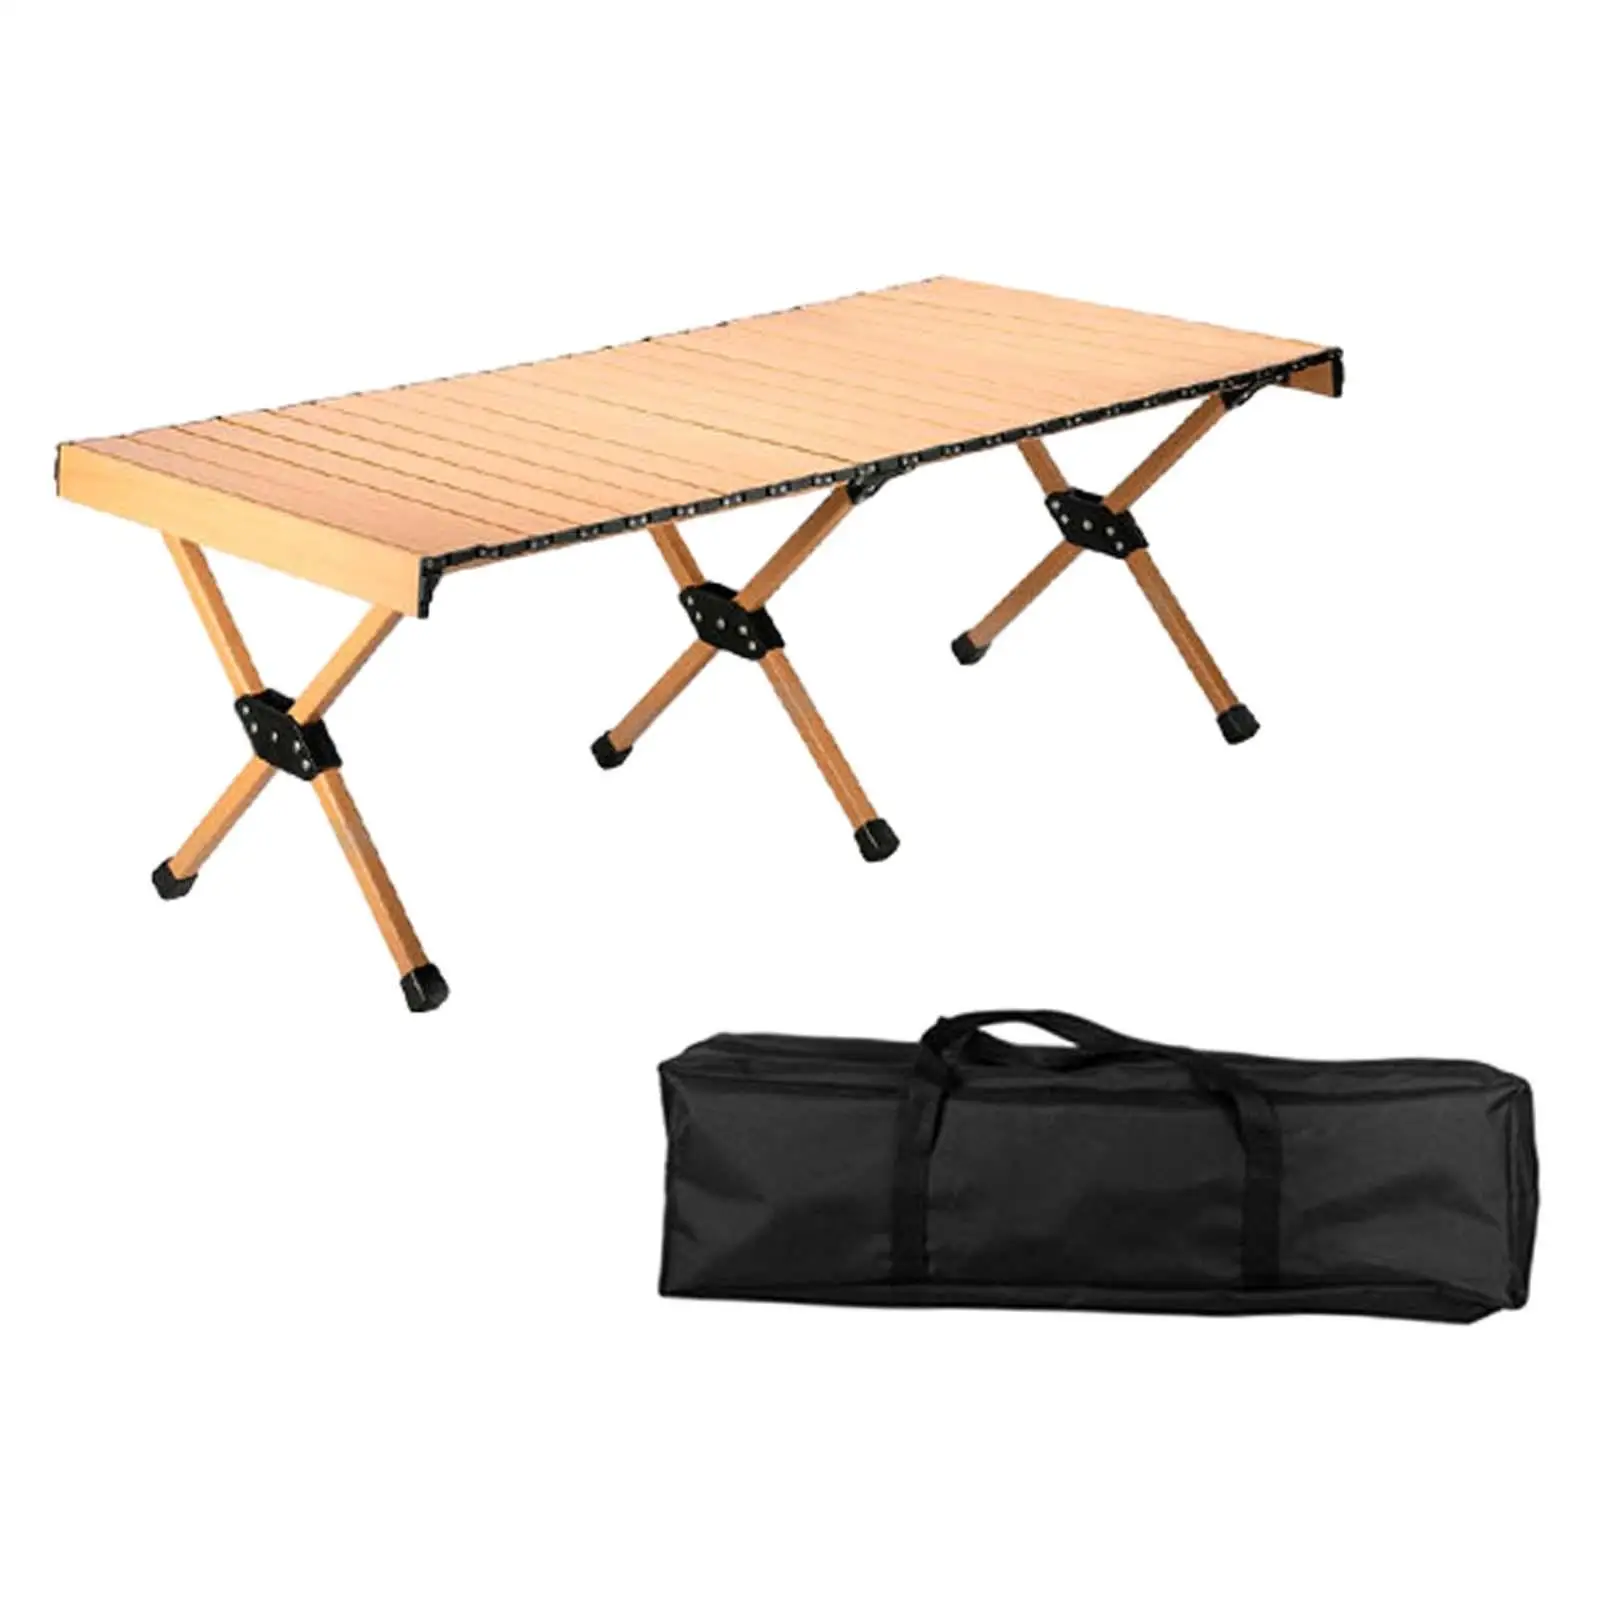 Camping Folding Table Aluminum Table Top with Storage Carrying Bags Picnic Table for Fishing Beach Backyard Cooking Backpacking